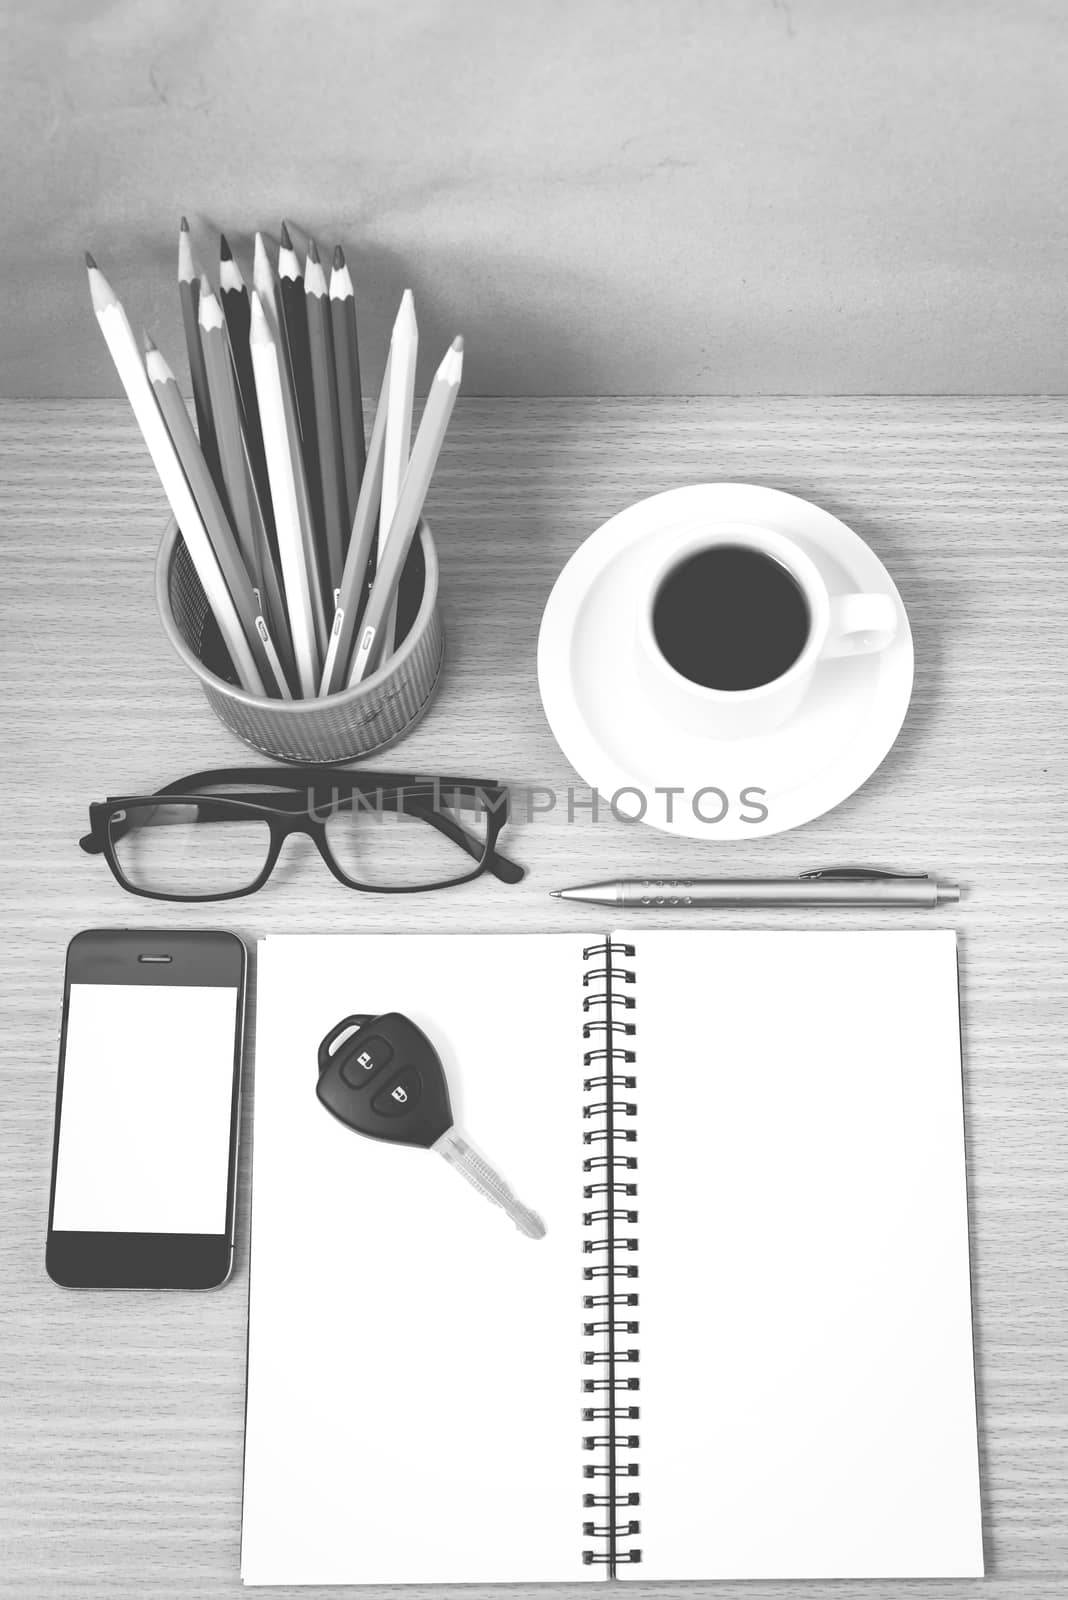 office desk : coffee and phone with key,eyeglasses,notepad,pencil box black and white color